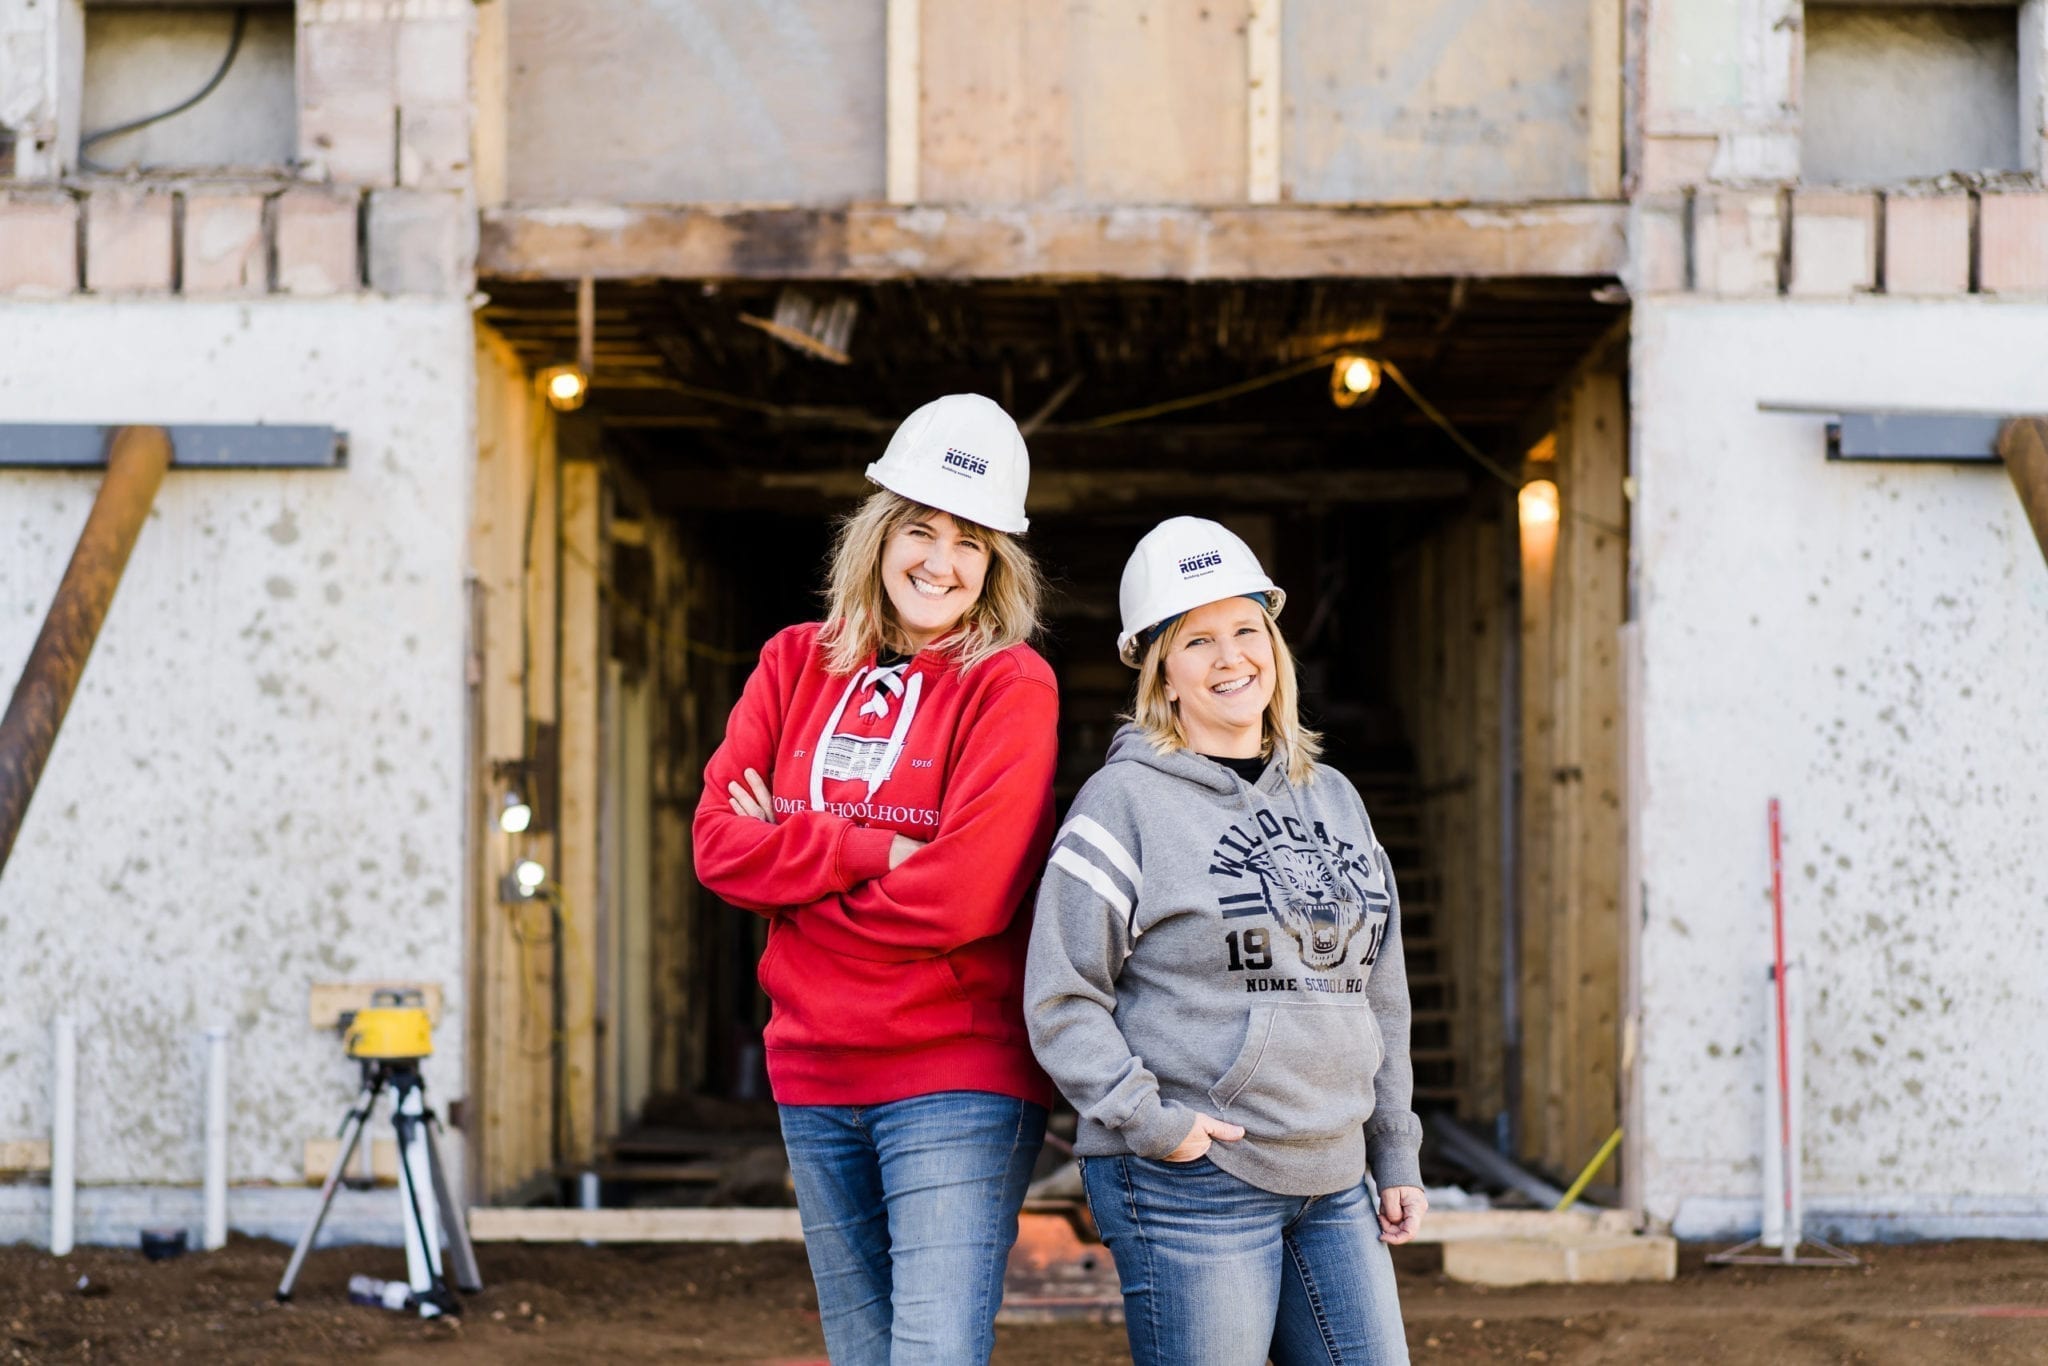 Chris Armbrust and Teresa Perleberg wearing hard hats and Nome Schoolhouse clothing, standing in front of the building when it was still under construction